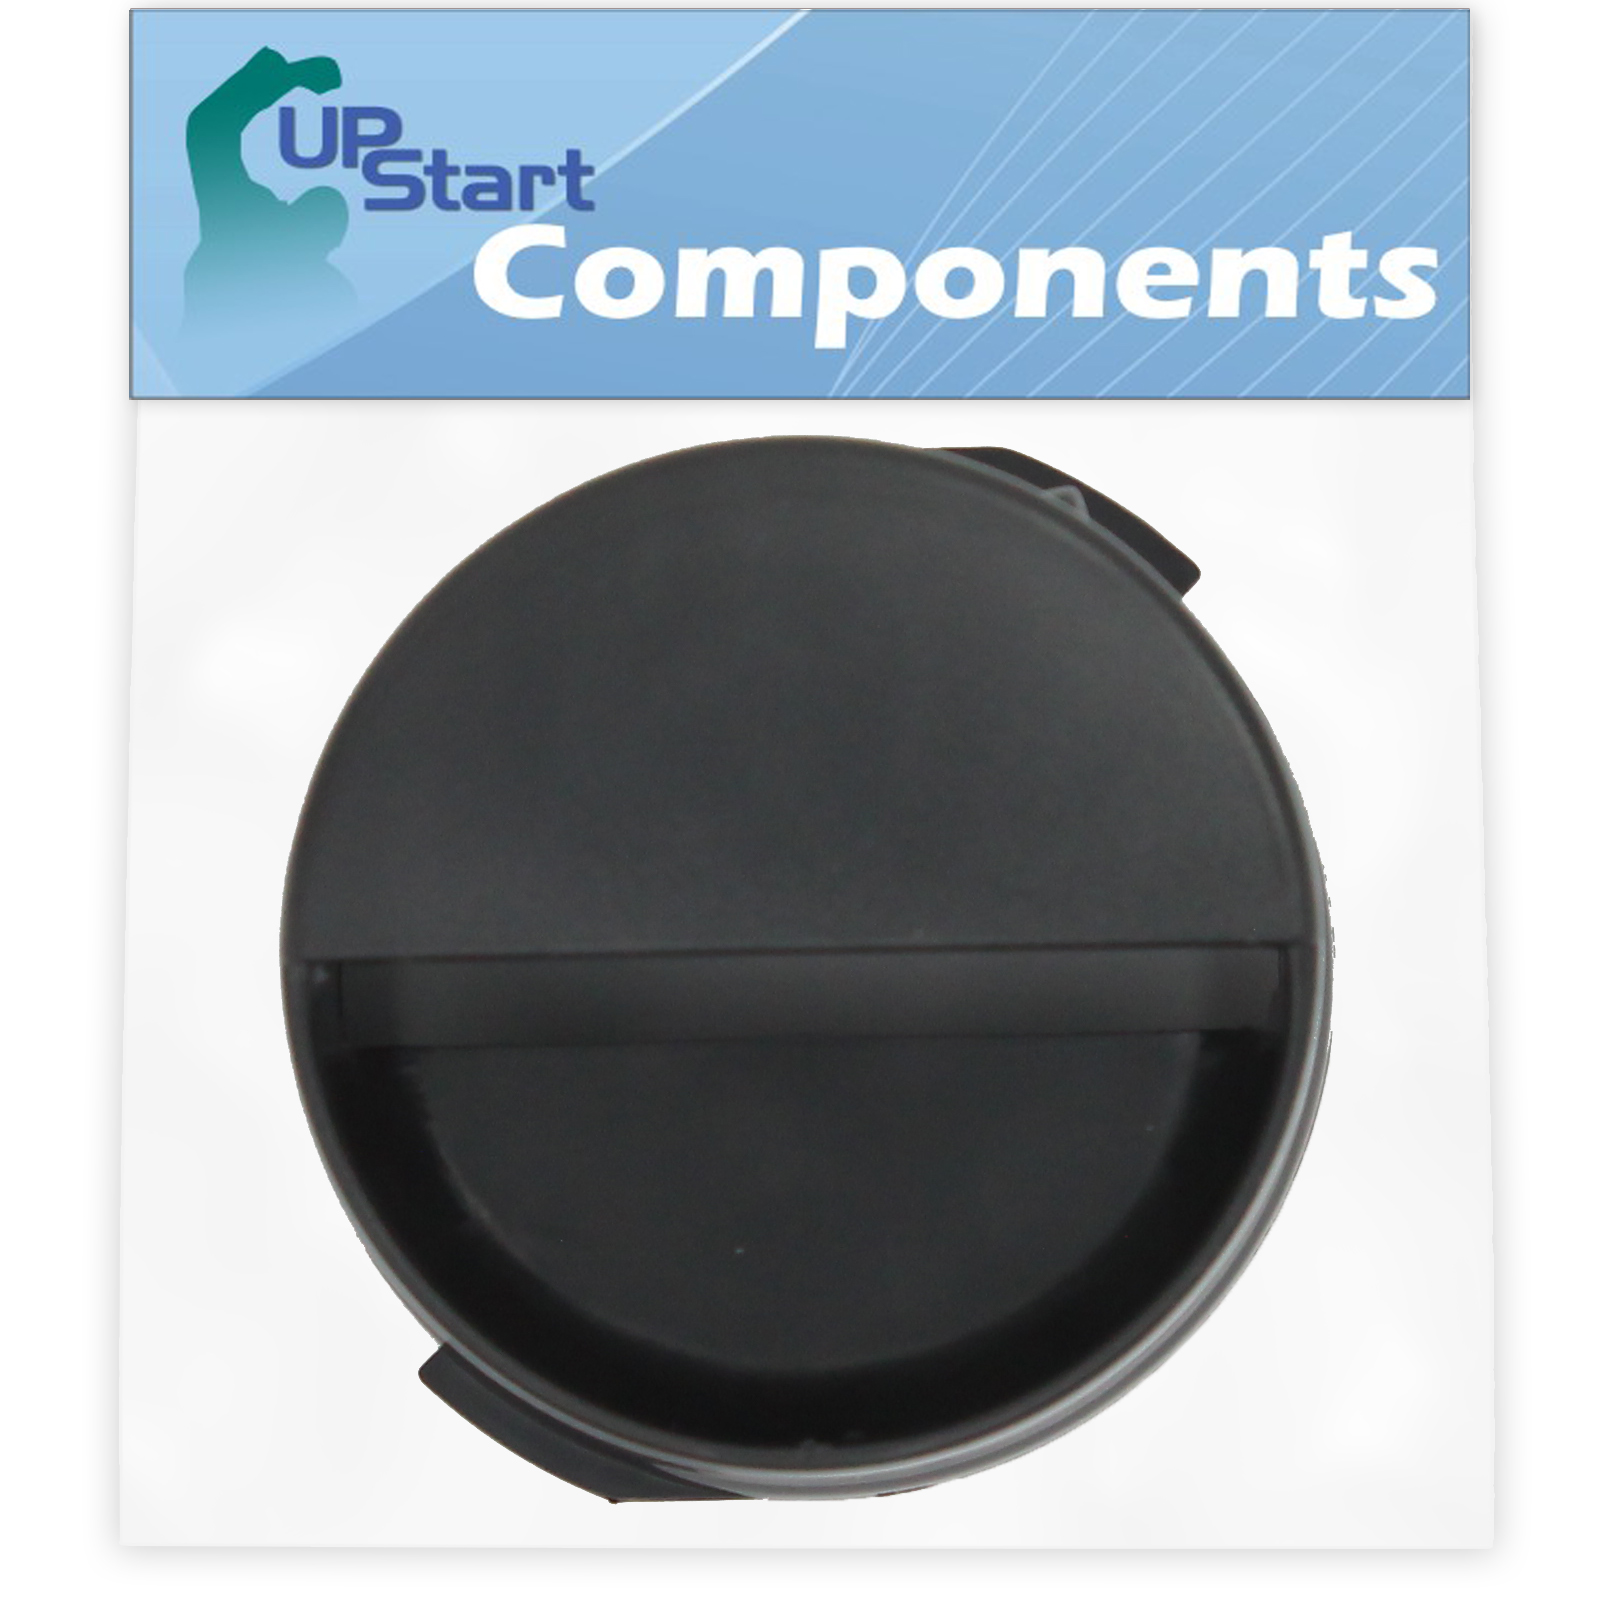 2260502B Refrigerator Water Filter Cap Replacement for Kenmore / Sears 10656992602 Refrigerator - Compatible with WP2260518B Black Water Filter Cap - UpStart Components Brand - image 1 of 4